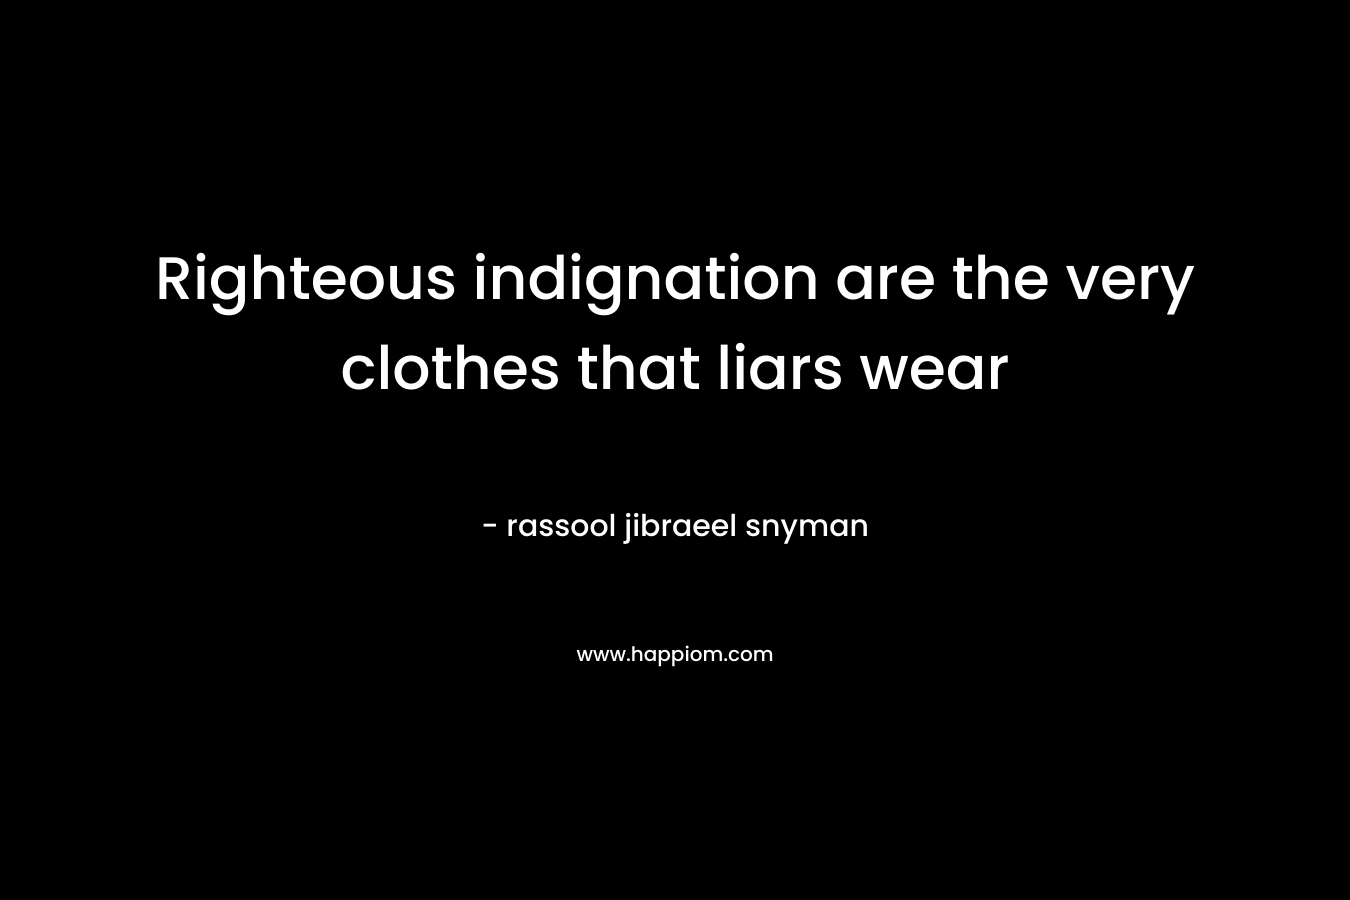 Righteous indignation are the very clothes that liars wear